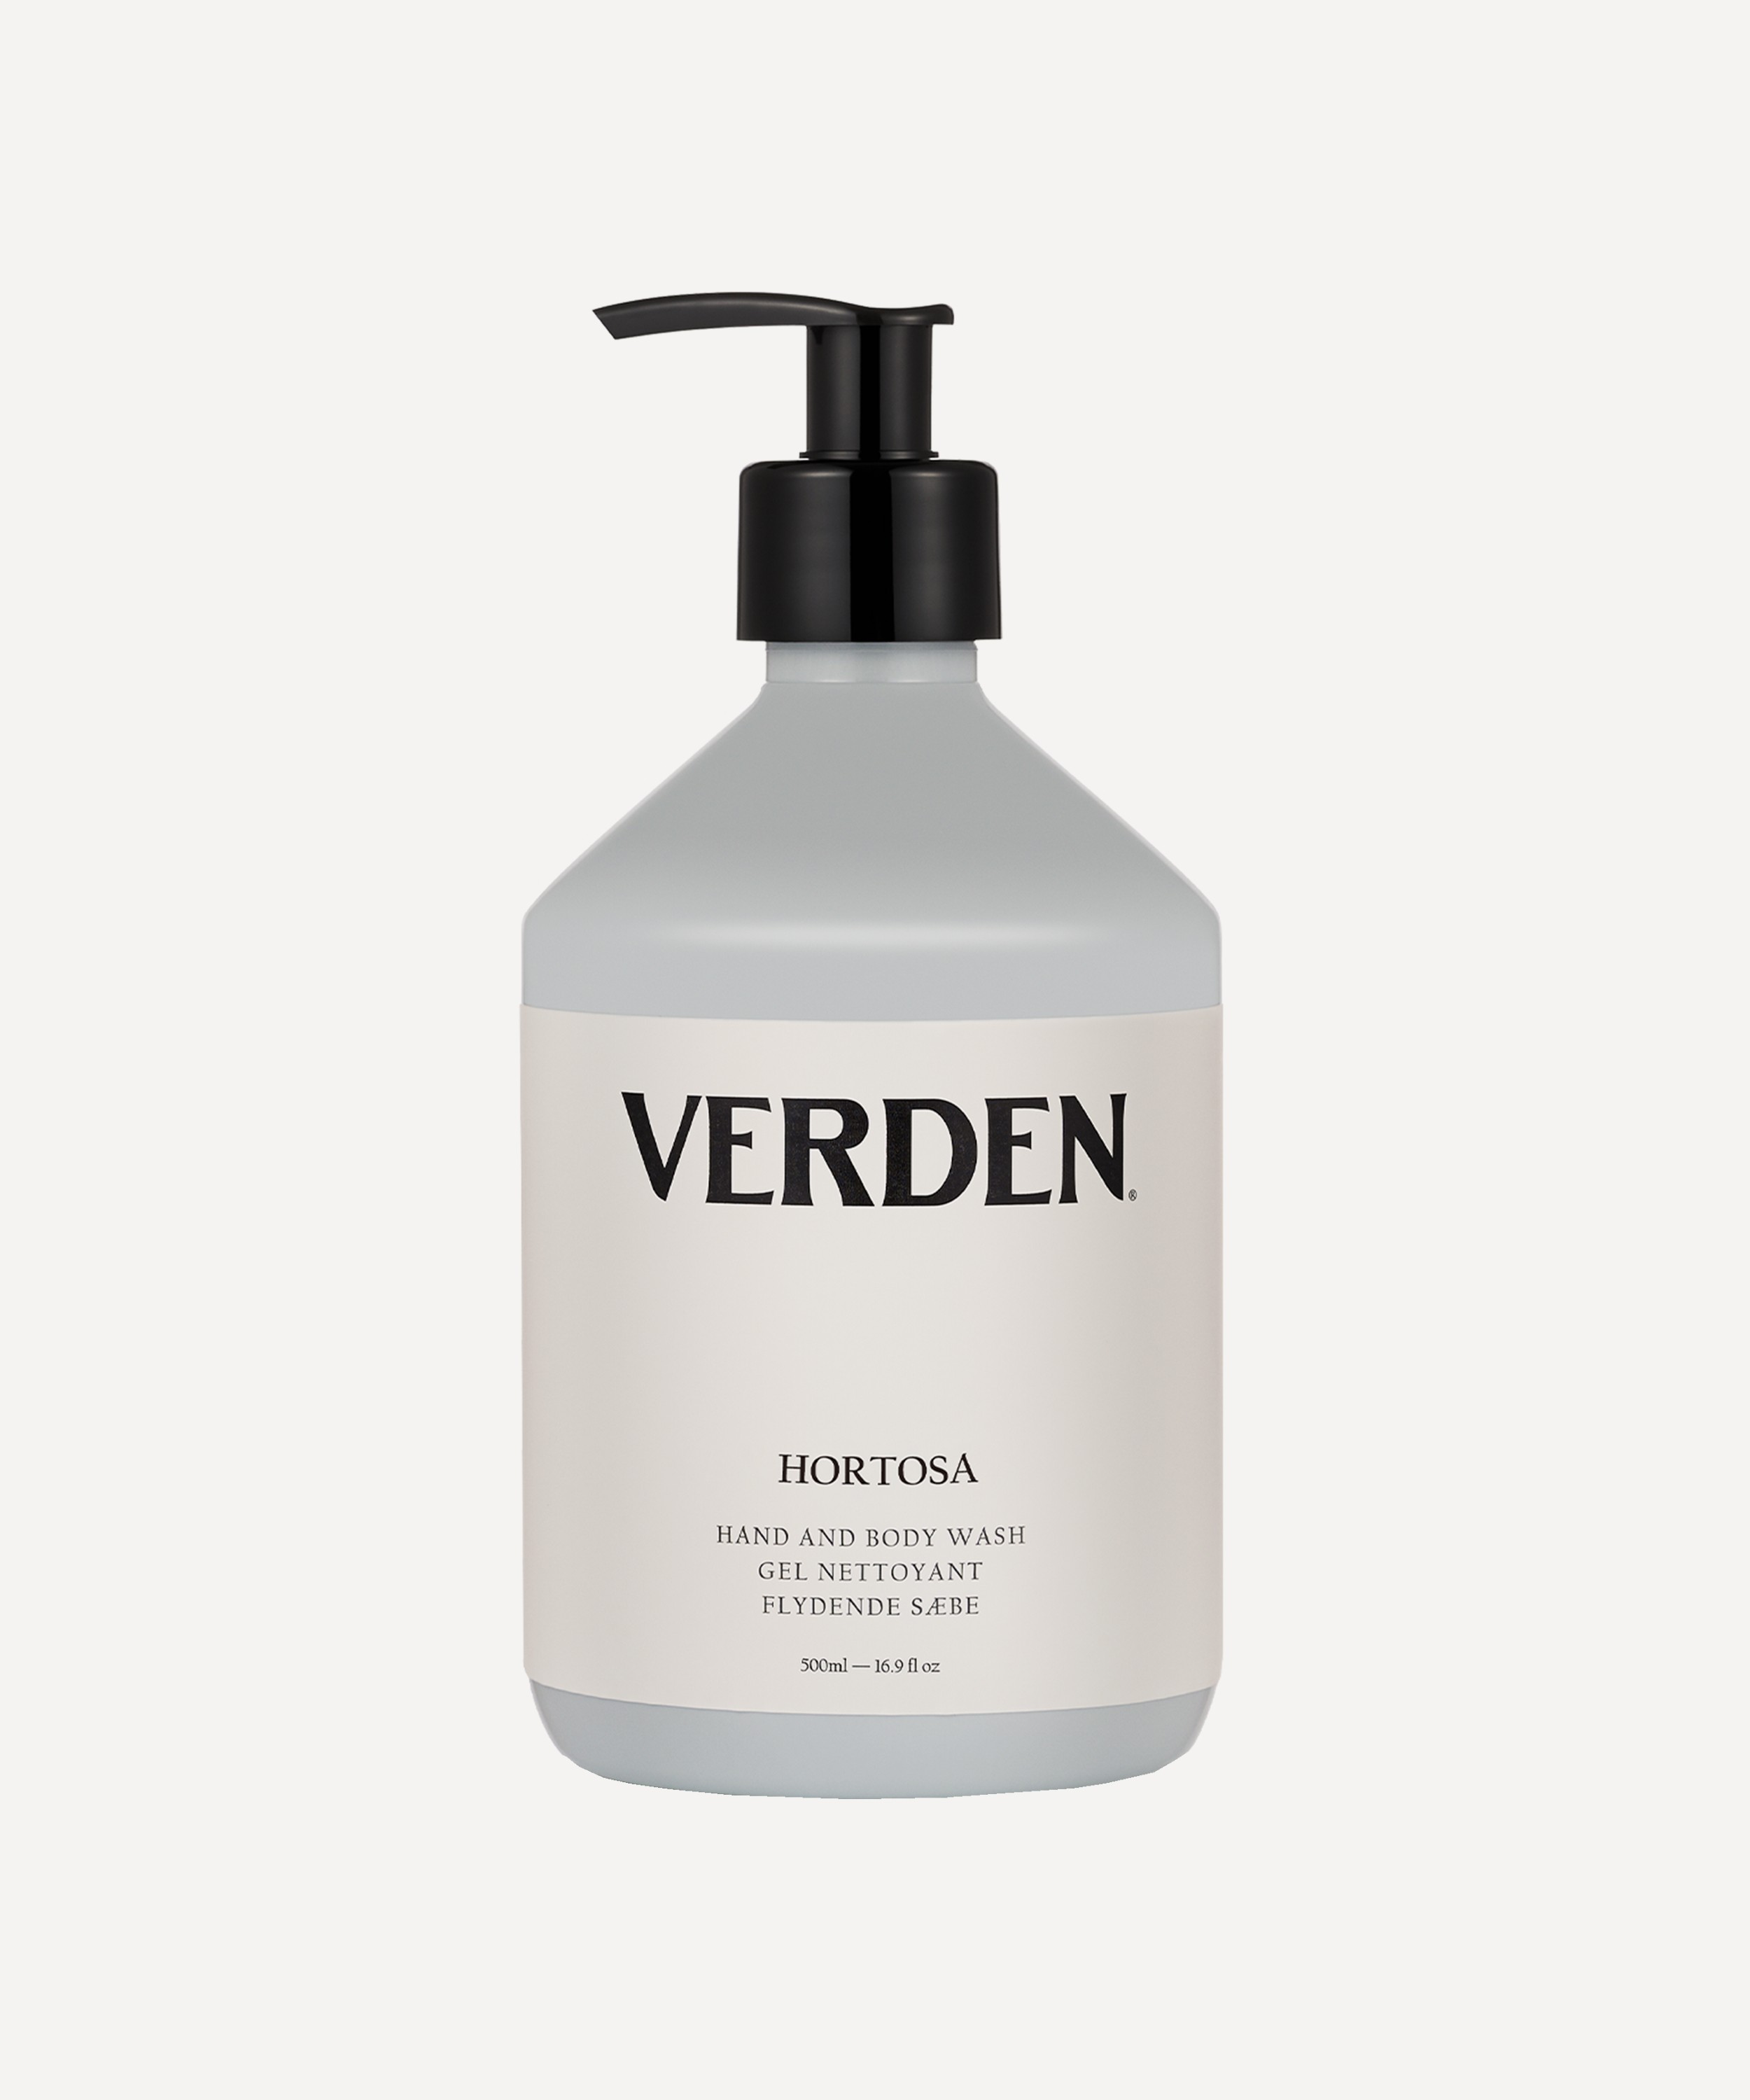 VERDEN - Hortosa Hand and Body Wash 500ml image number 0